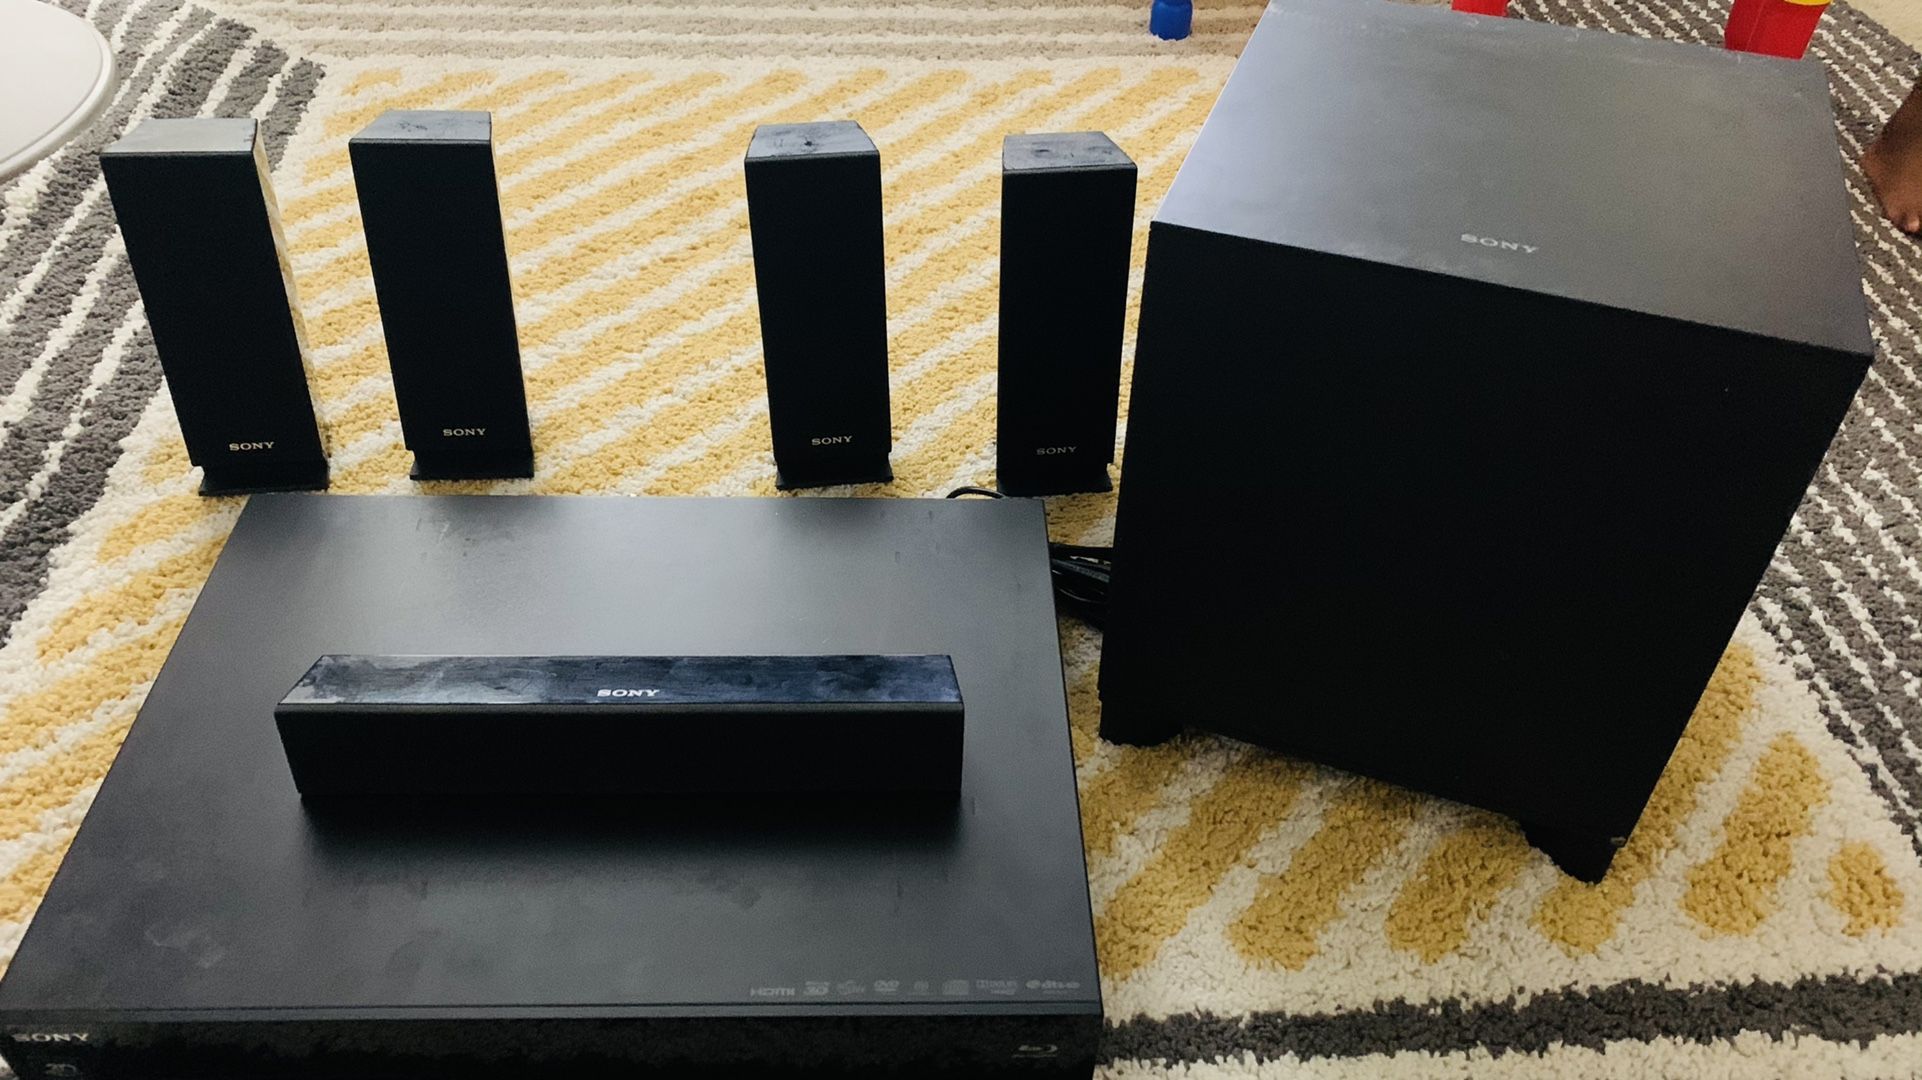 Sony 5.1 Speakers with Bluray Player (wired) - FREE